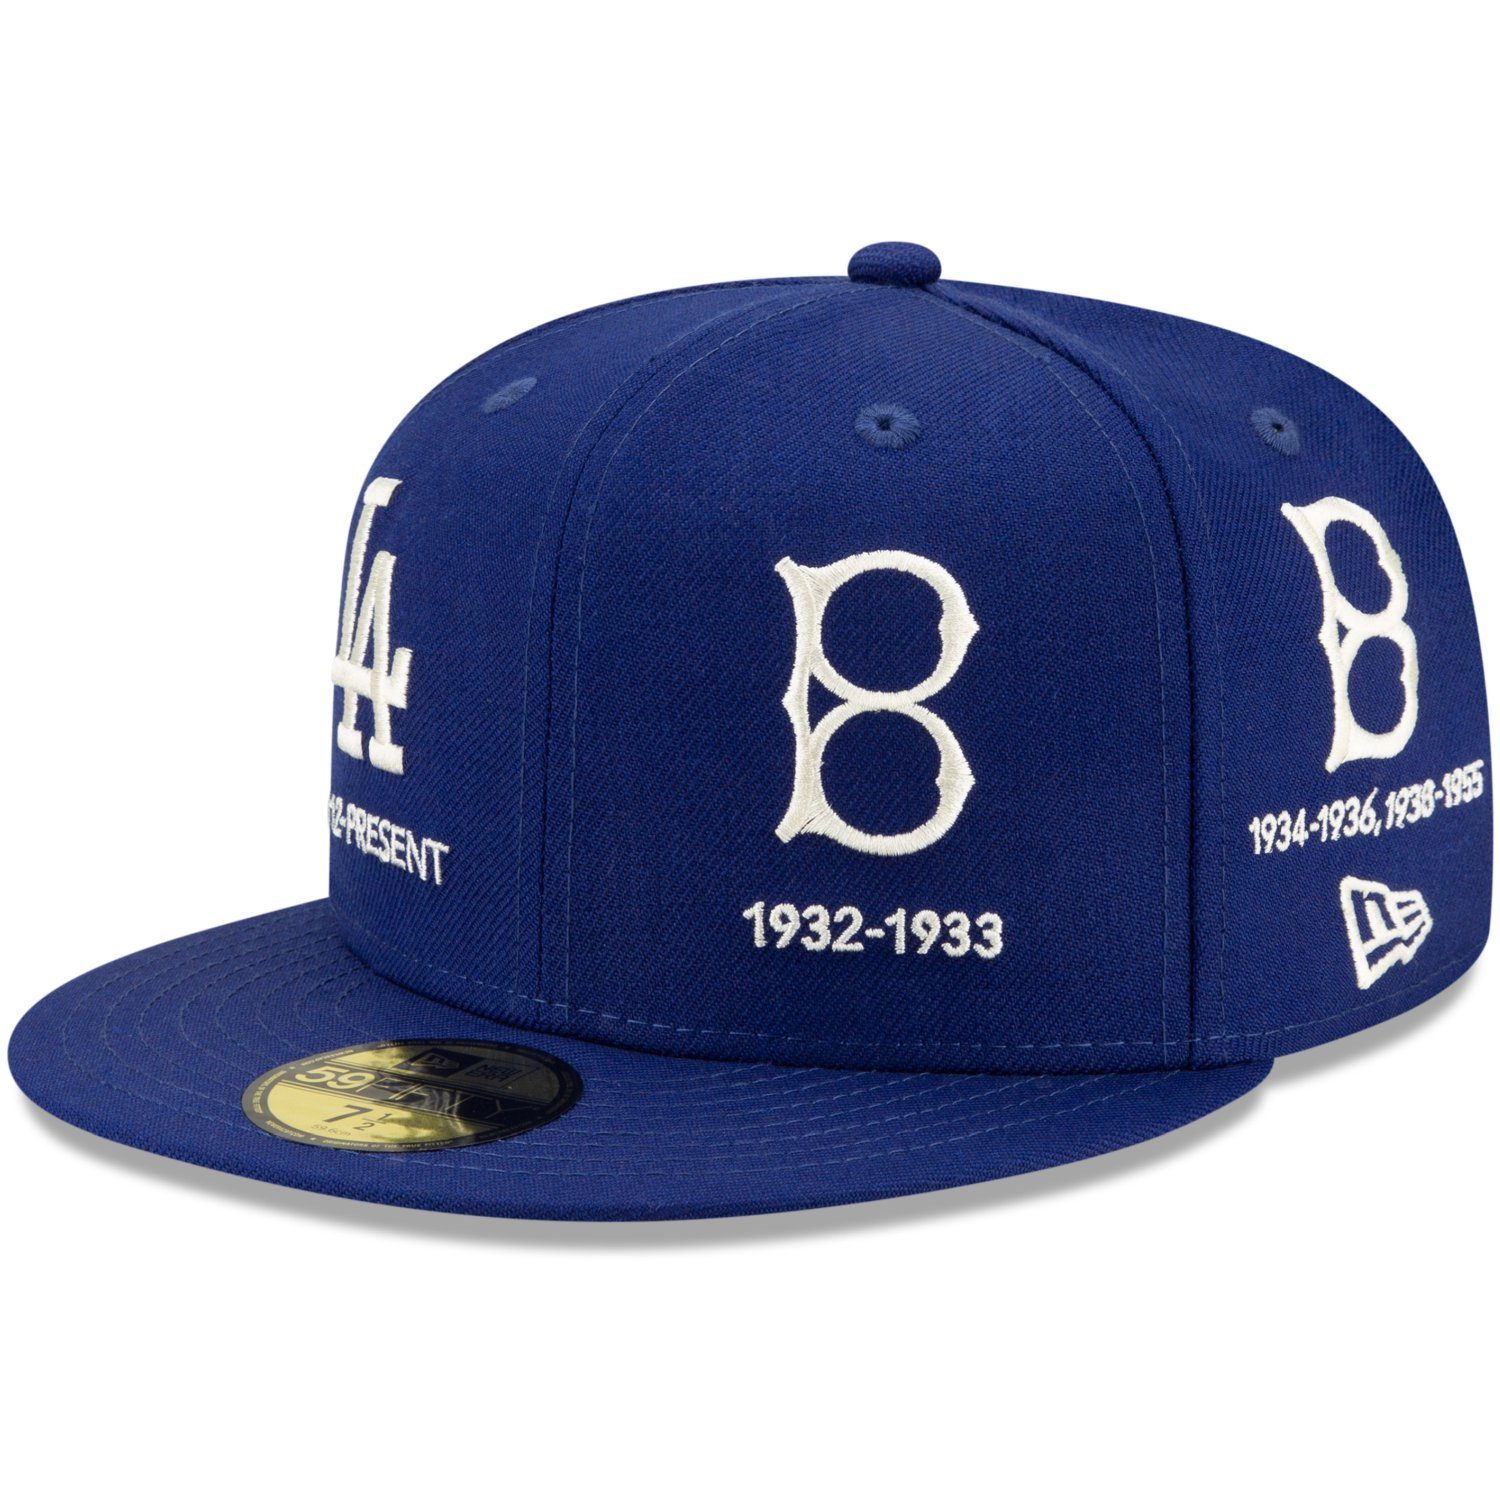 Los Fitted New 59Fifty Era COOPERSTOWN Cap Angeles Dodgers